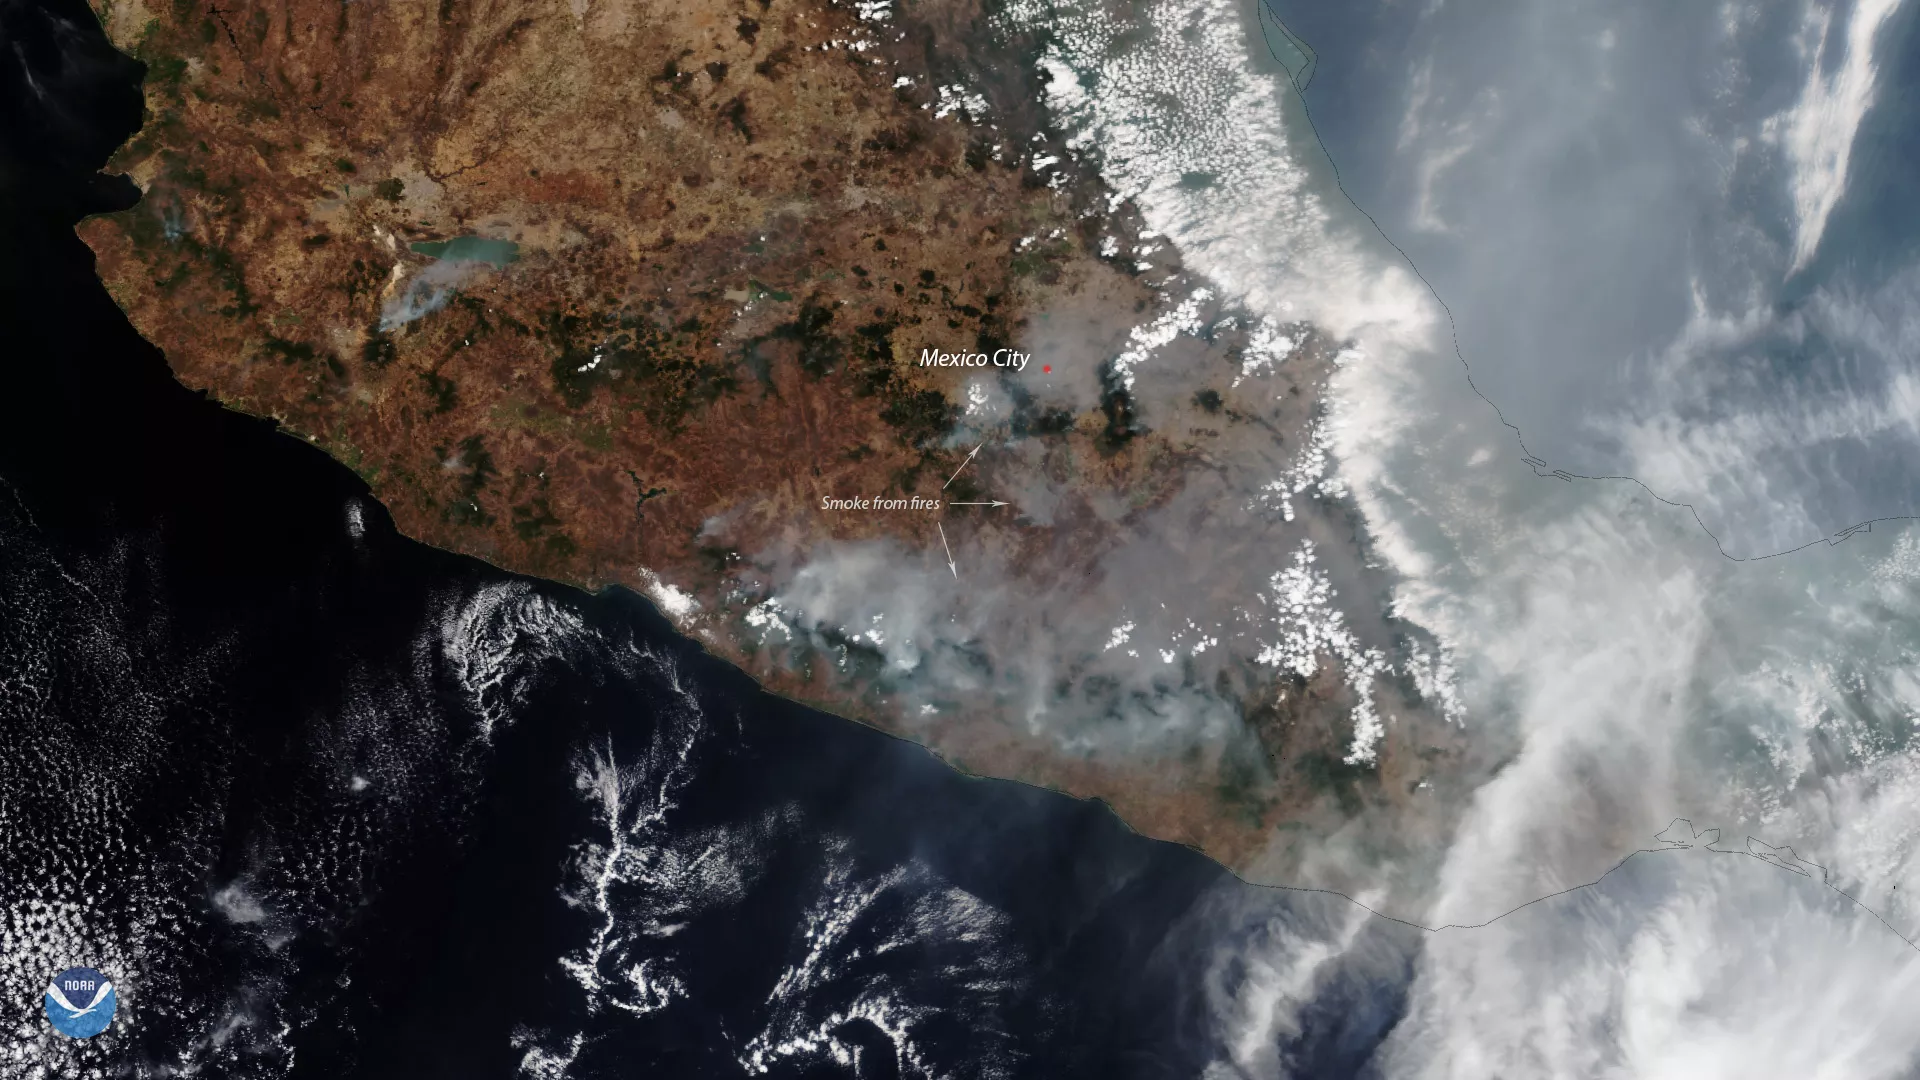 Wildfire smoke over Mexico City and surrounding area